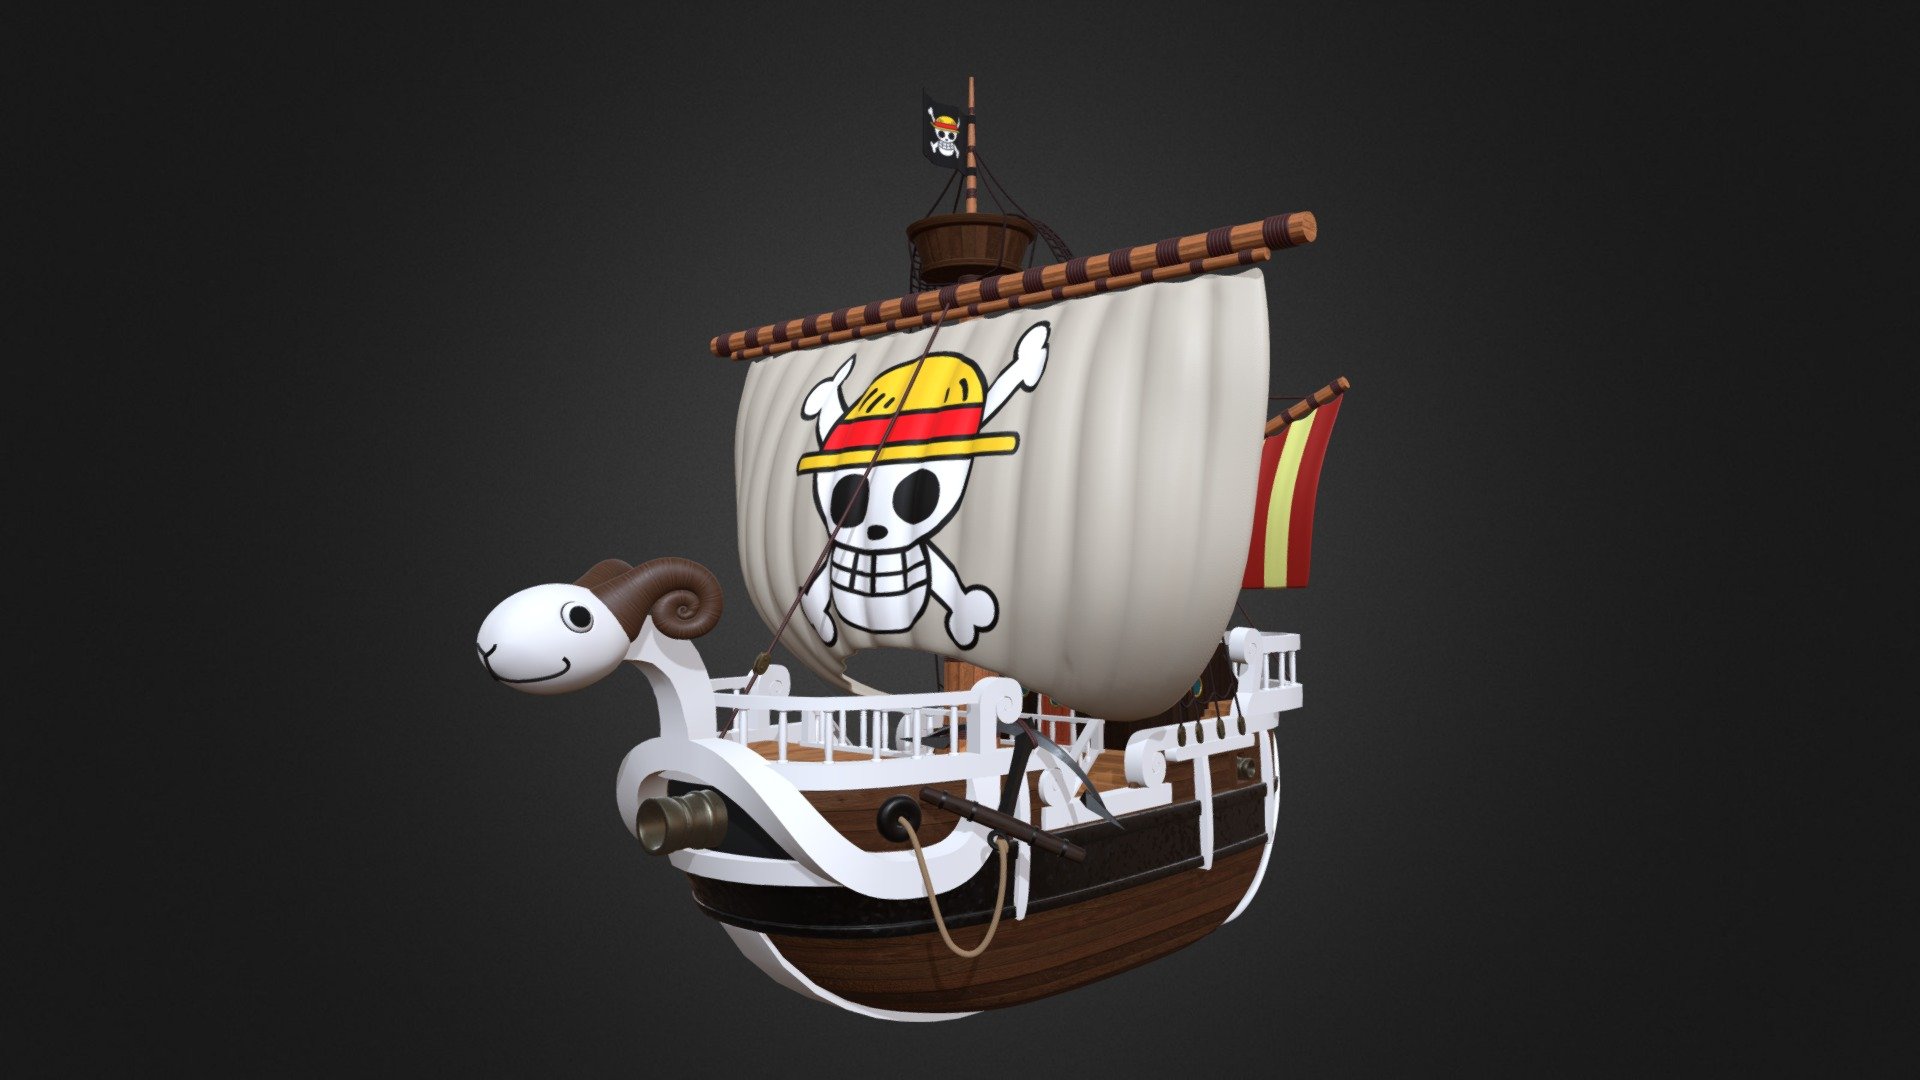 Just a replica of the first ship of the Straw Hat Pirates from One Piece! 

I've made plenty of One Piece illustrations throughout the years, but never a 3D piece, that's why I wanted my first One Piece model to be something cool! 
And so, I decided to do the Going Merry, the first ship and a very important character in the series.
Hope you like it!

(Just in case, here's a reference from the anime!) - One Piece Going Merry - 3D model by thedigitaltakoyaki 3d model